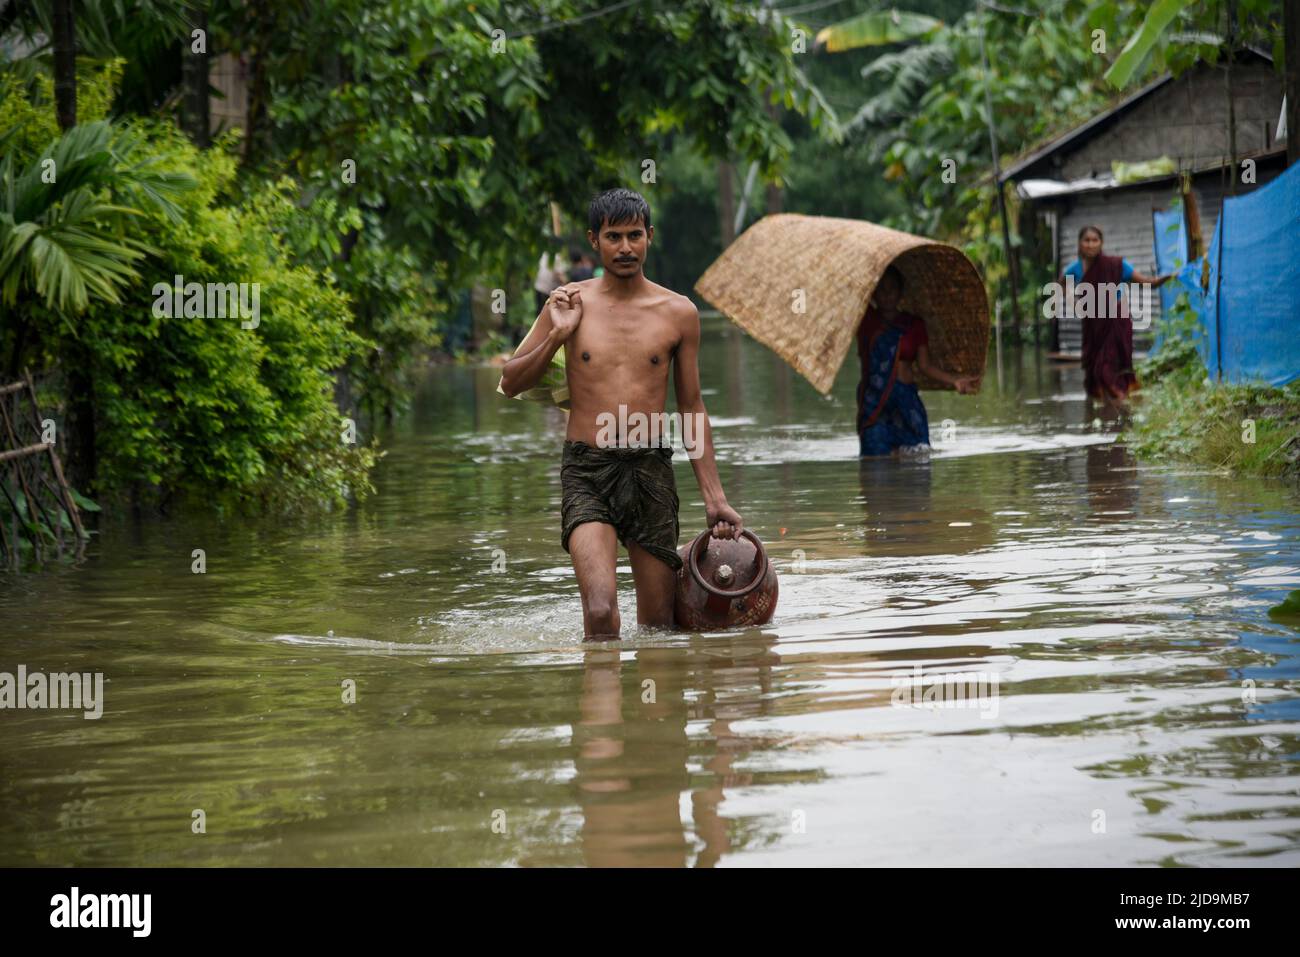 Flood affected people coming towards a safer place, at a village on June 17, 2022 in Barpeta, India. Assam flood situation deteriorates due to heavy rain,  millions of  people affected. Stock Photo